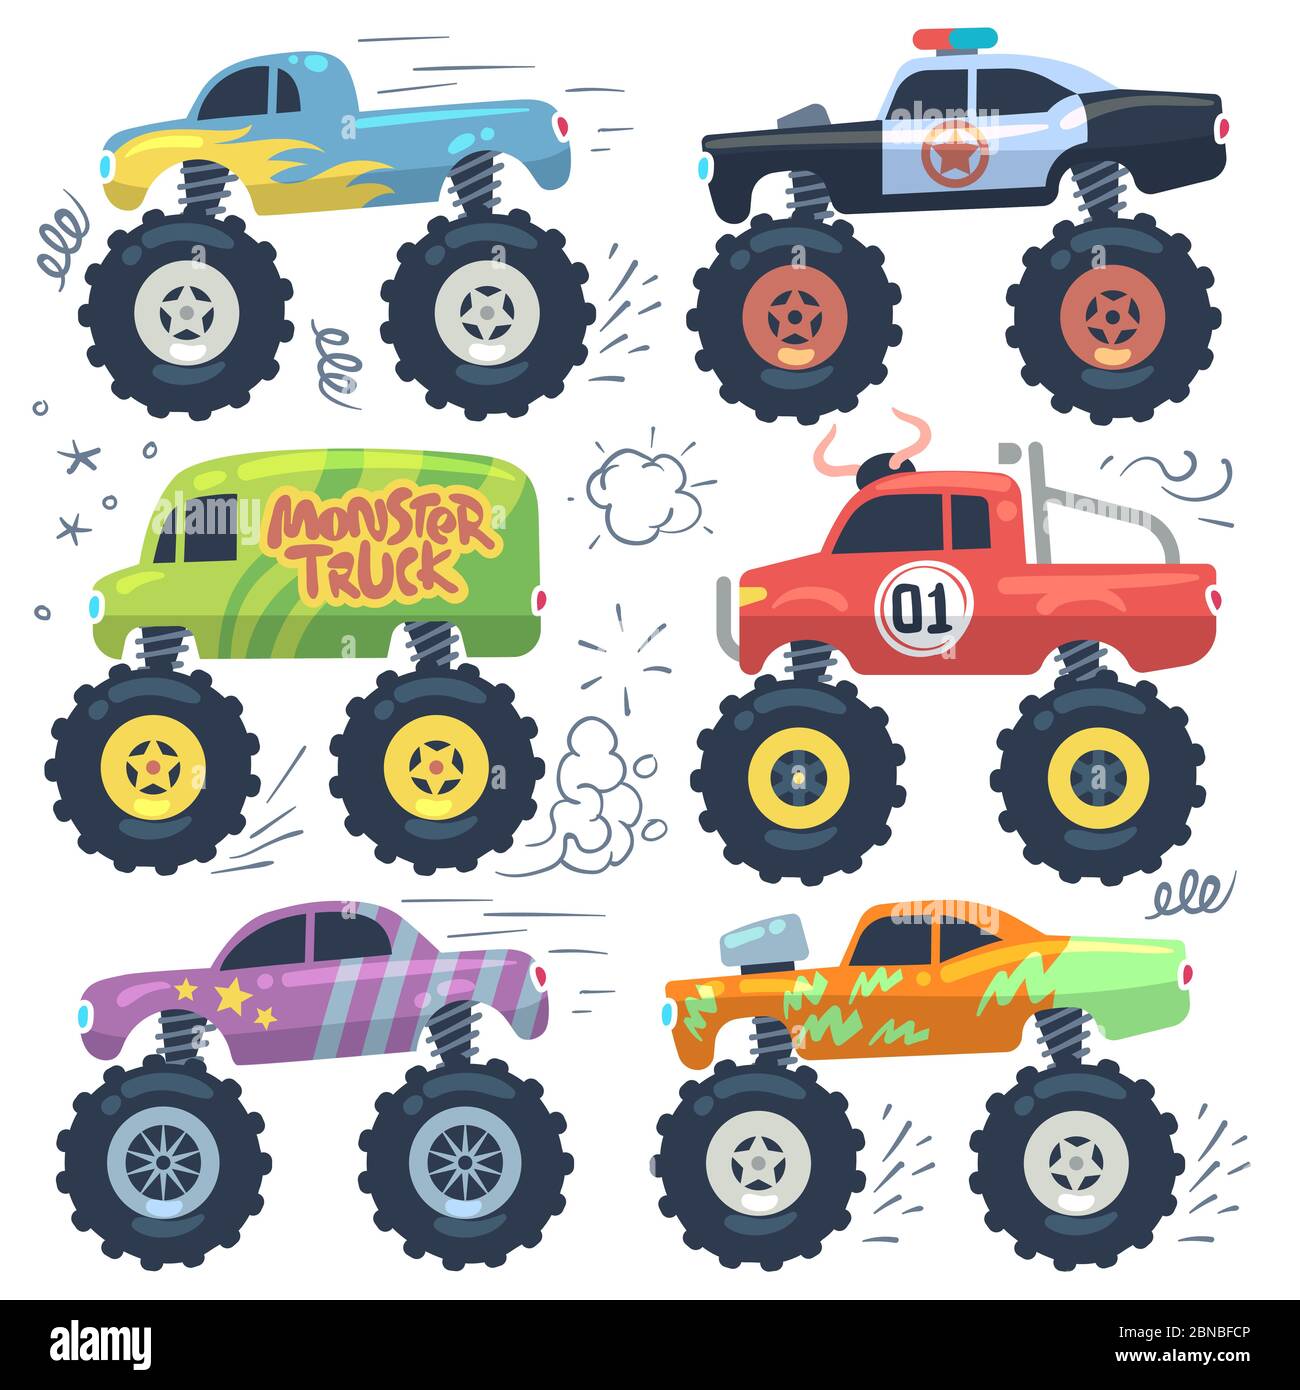 Monster cars. Cartoon cars with big wheels. Isolated vector set. Illustration of transportation monster truck collection Stock Vector